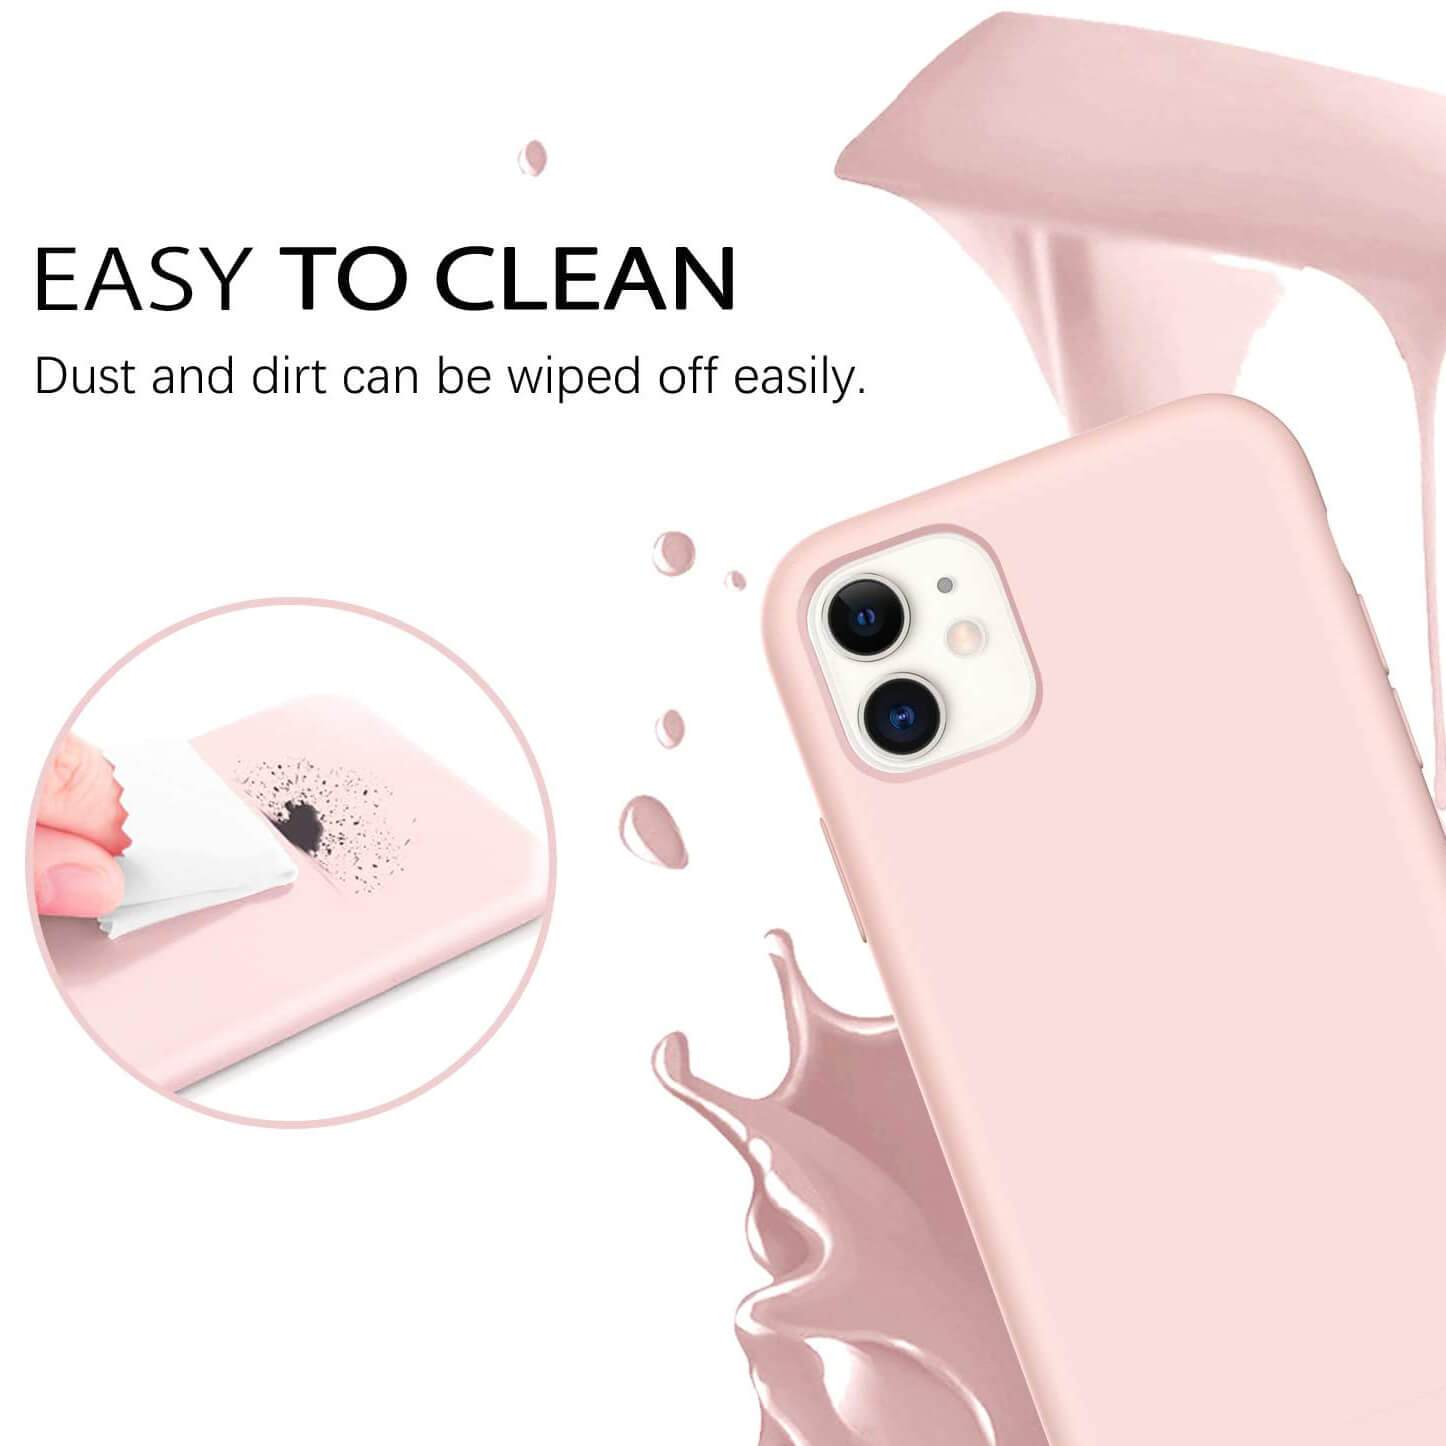 Liquid Silicone Case For Apple iPhone 11 Luxury Thin Phone Cover Pink Sand